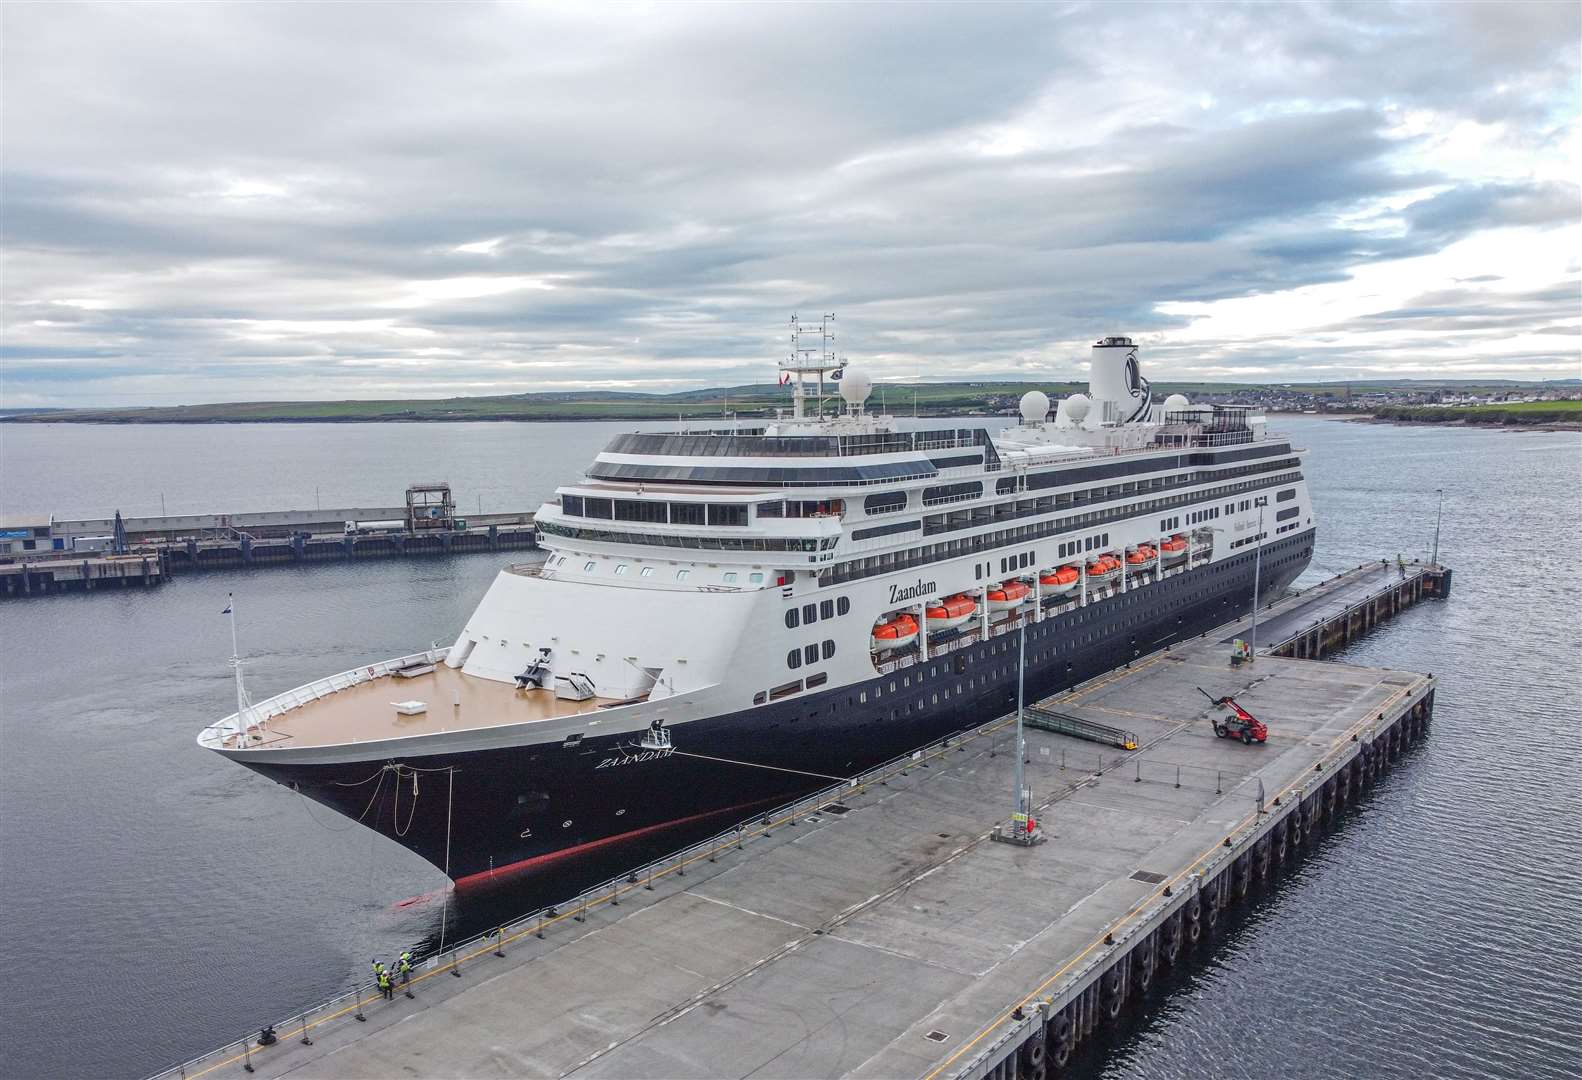 The Zaandam moored alongside the 250-metre east berth of the recently redeveloped St Ola Pier. Picture: Barry Scollay / Highland Aerial Views